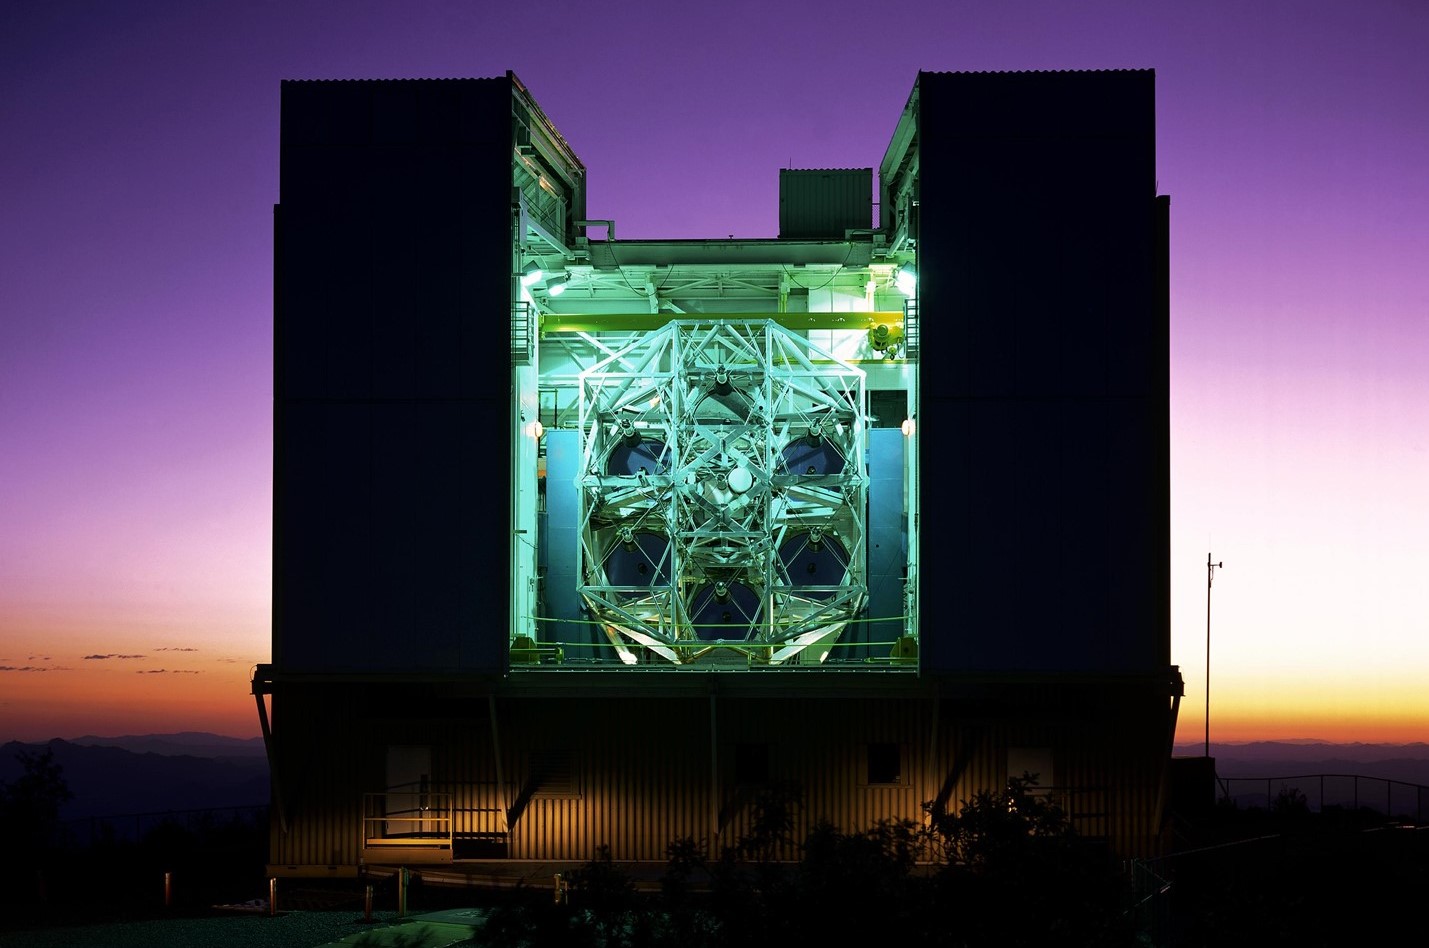 The Multiple Mirror Telescope Observatory on Mount Hopkins, Arizona, in its original six-mirror configuration using mirrors from the MOL Program